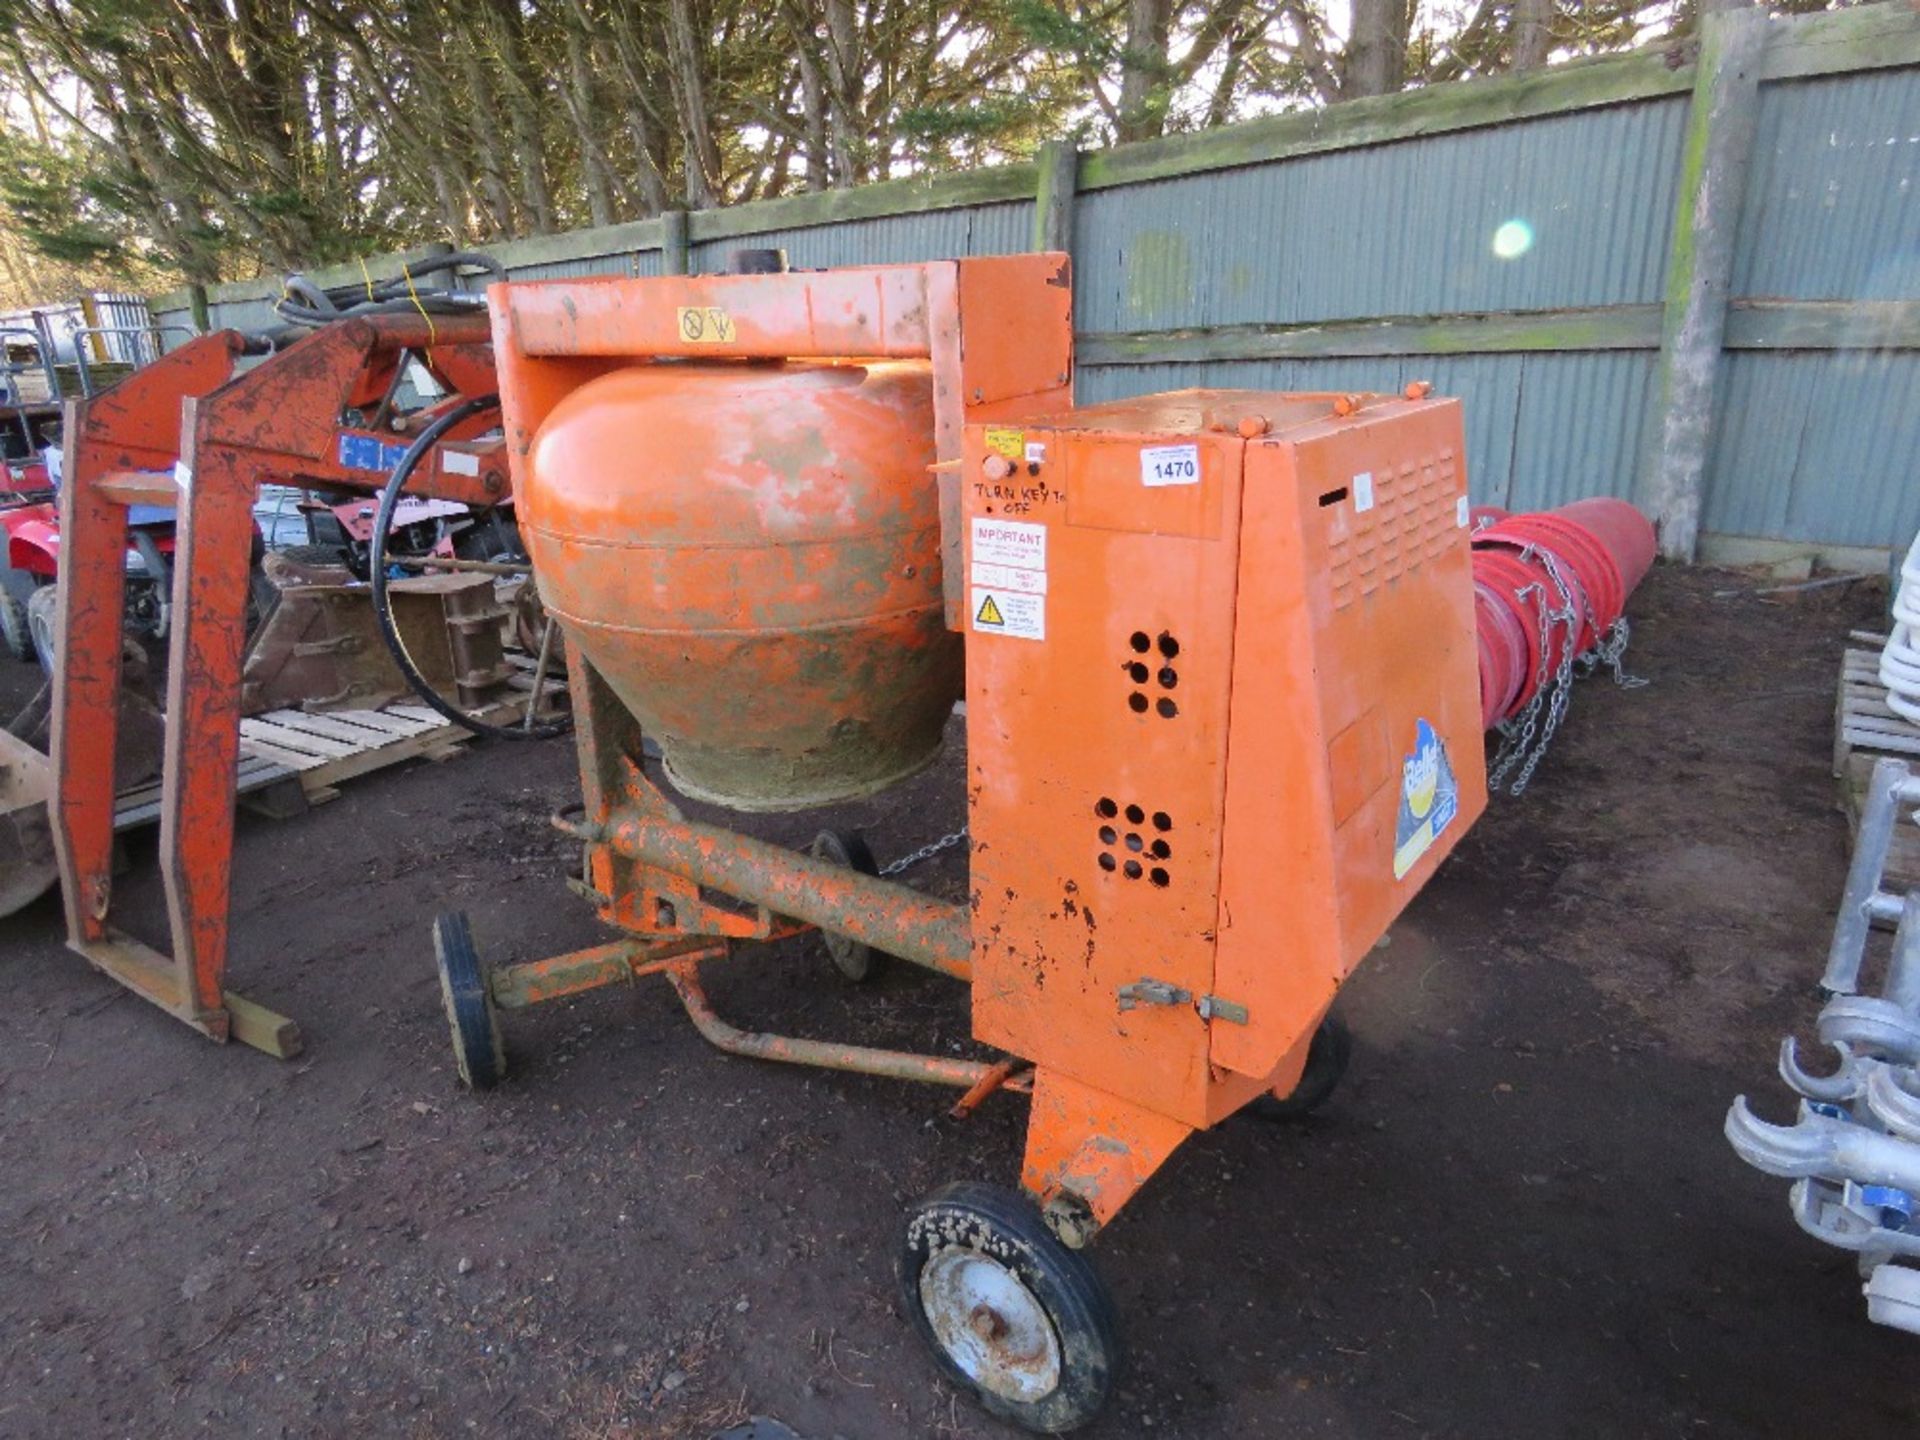 BELLE 100XT DIESEL SITE CEMENT MIXER, YEAR 2014 BUILD. WHEN TESTED WAS SEEN RUN AND DRUM TURNE